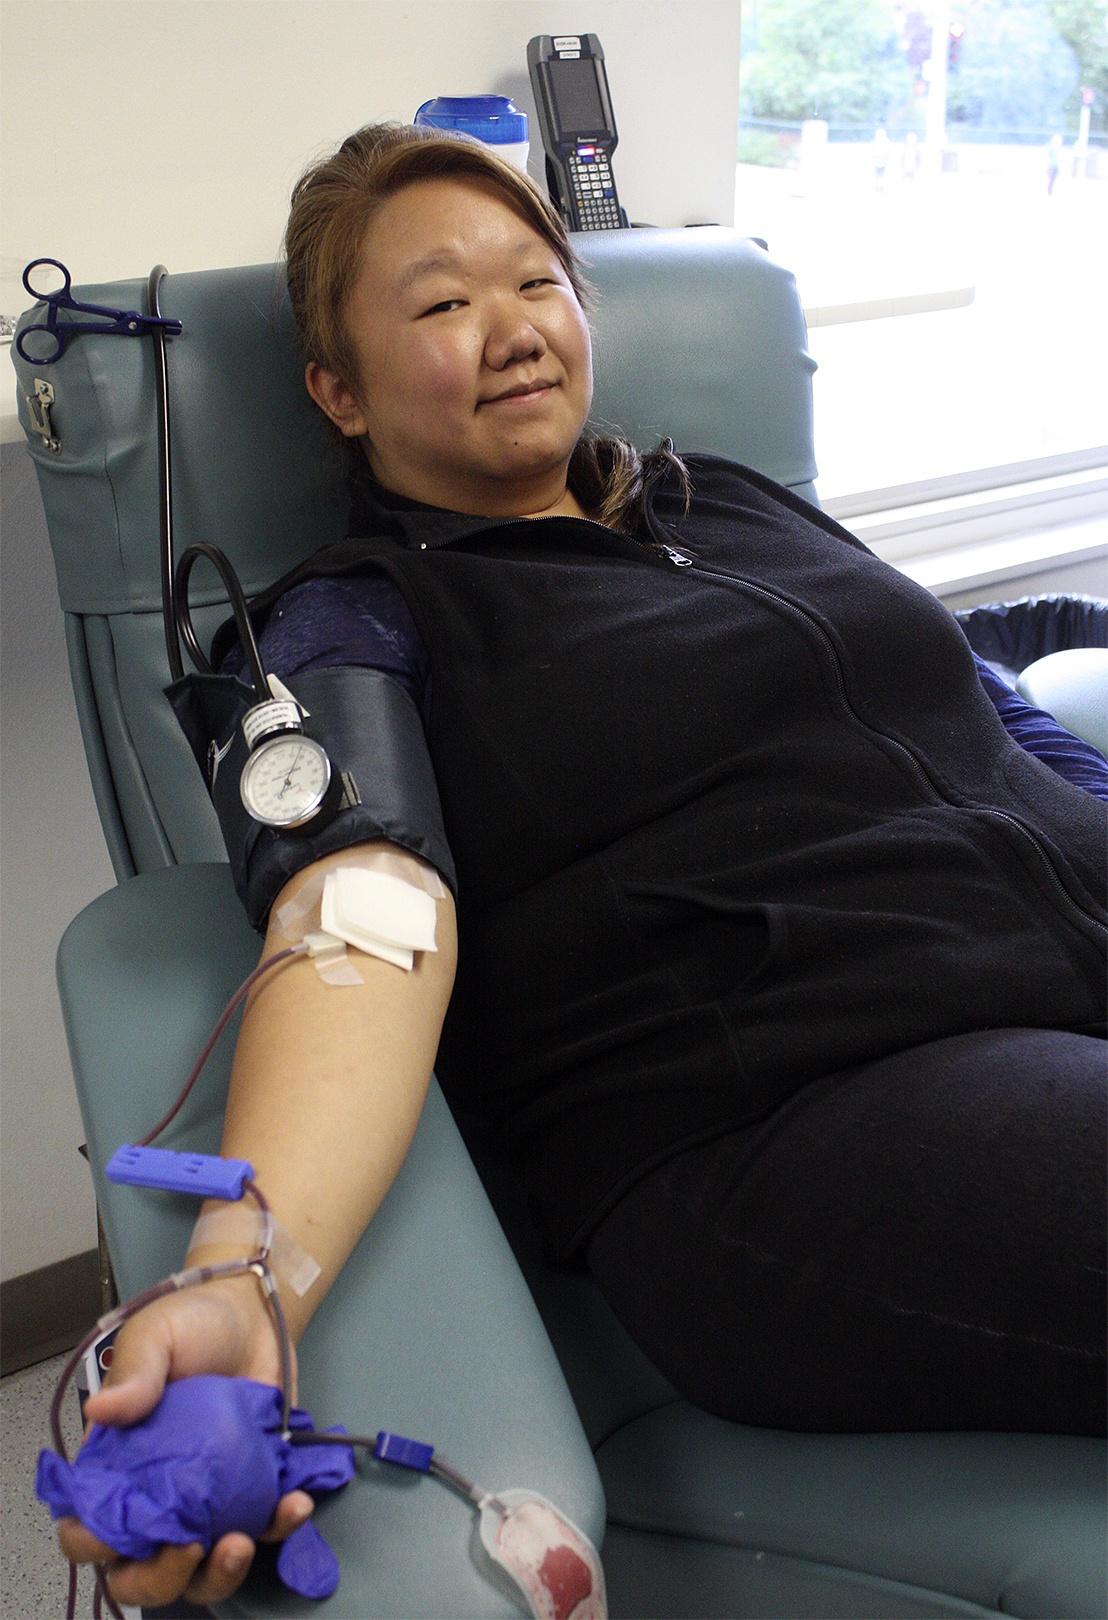 A local woman donates blood at Bloodworks Northwest